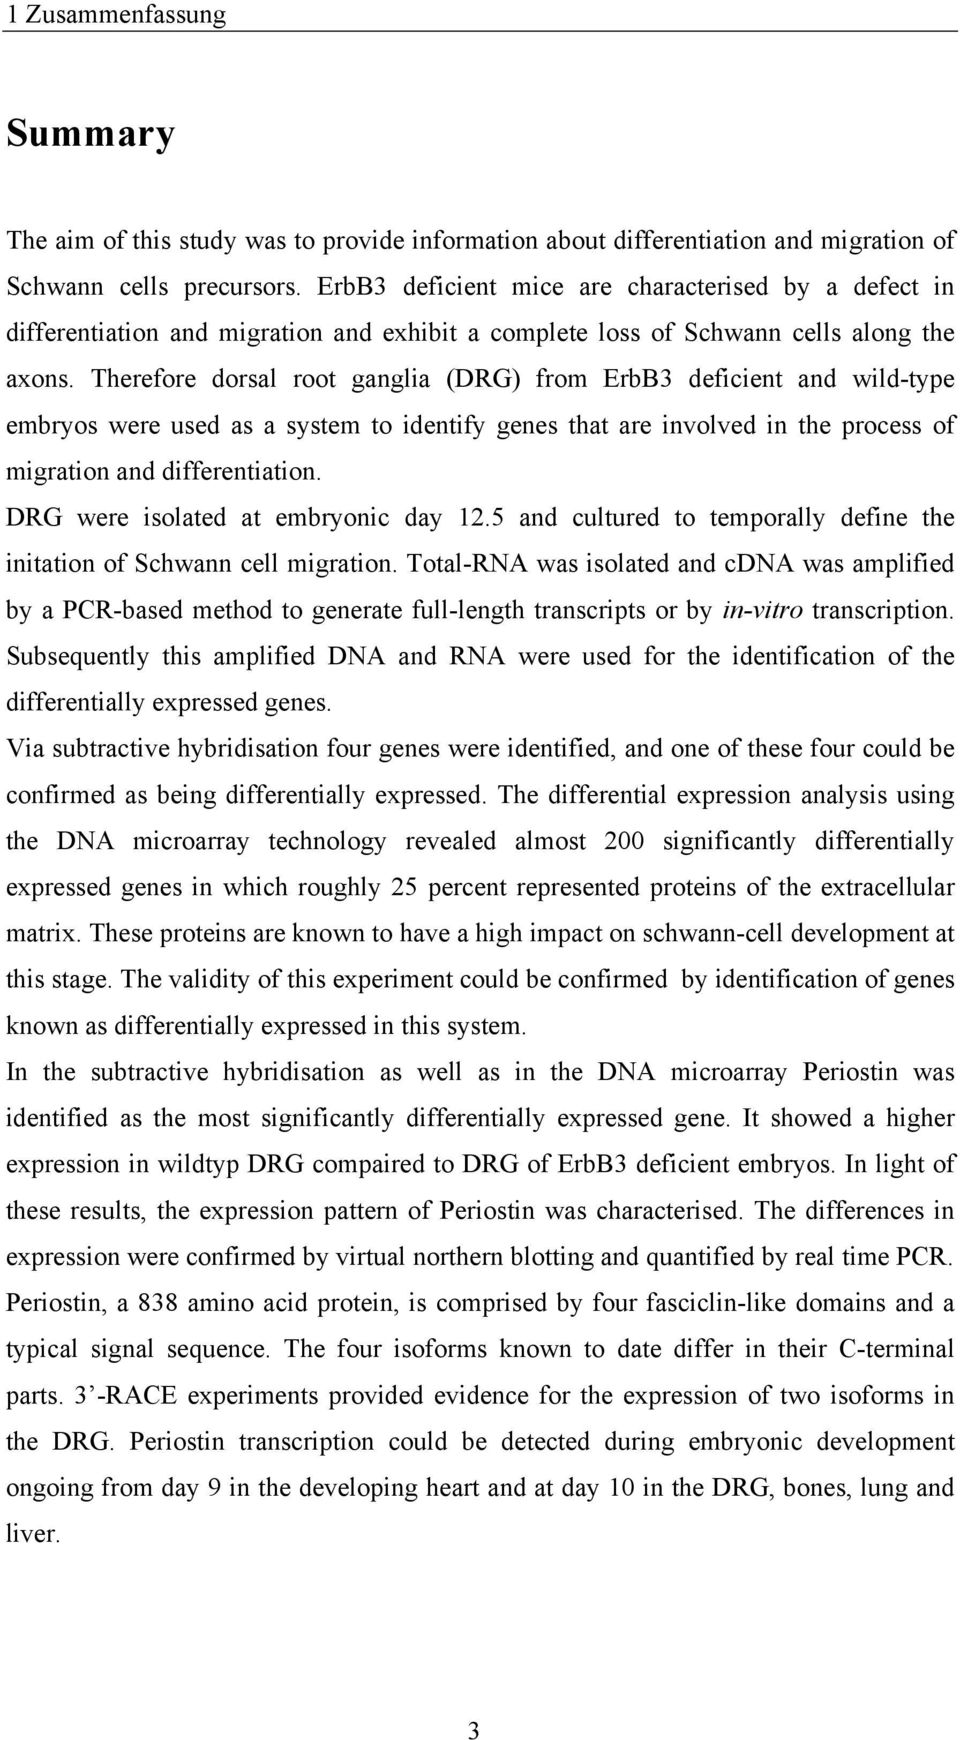 Therefore dorsal root ganglia (DRG) from ErbB3 deficient and wild-type embryos were used as a system to identify genes that are involved in the process of migration and differentiation.